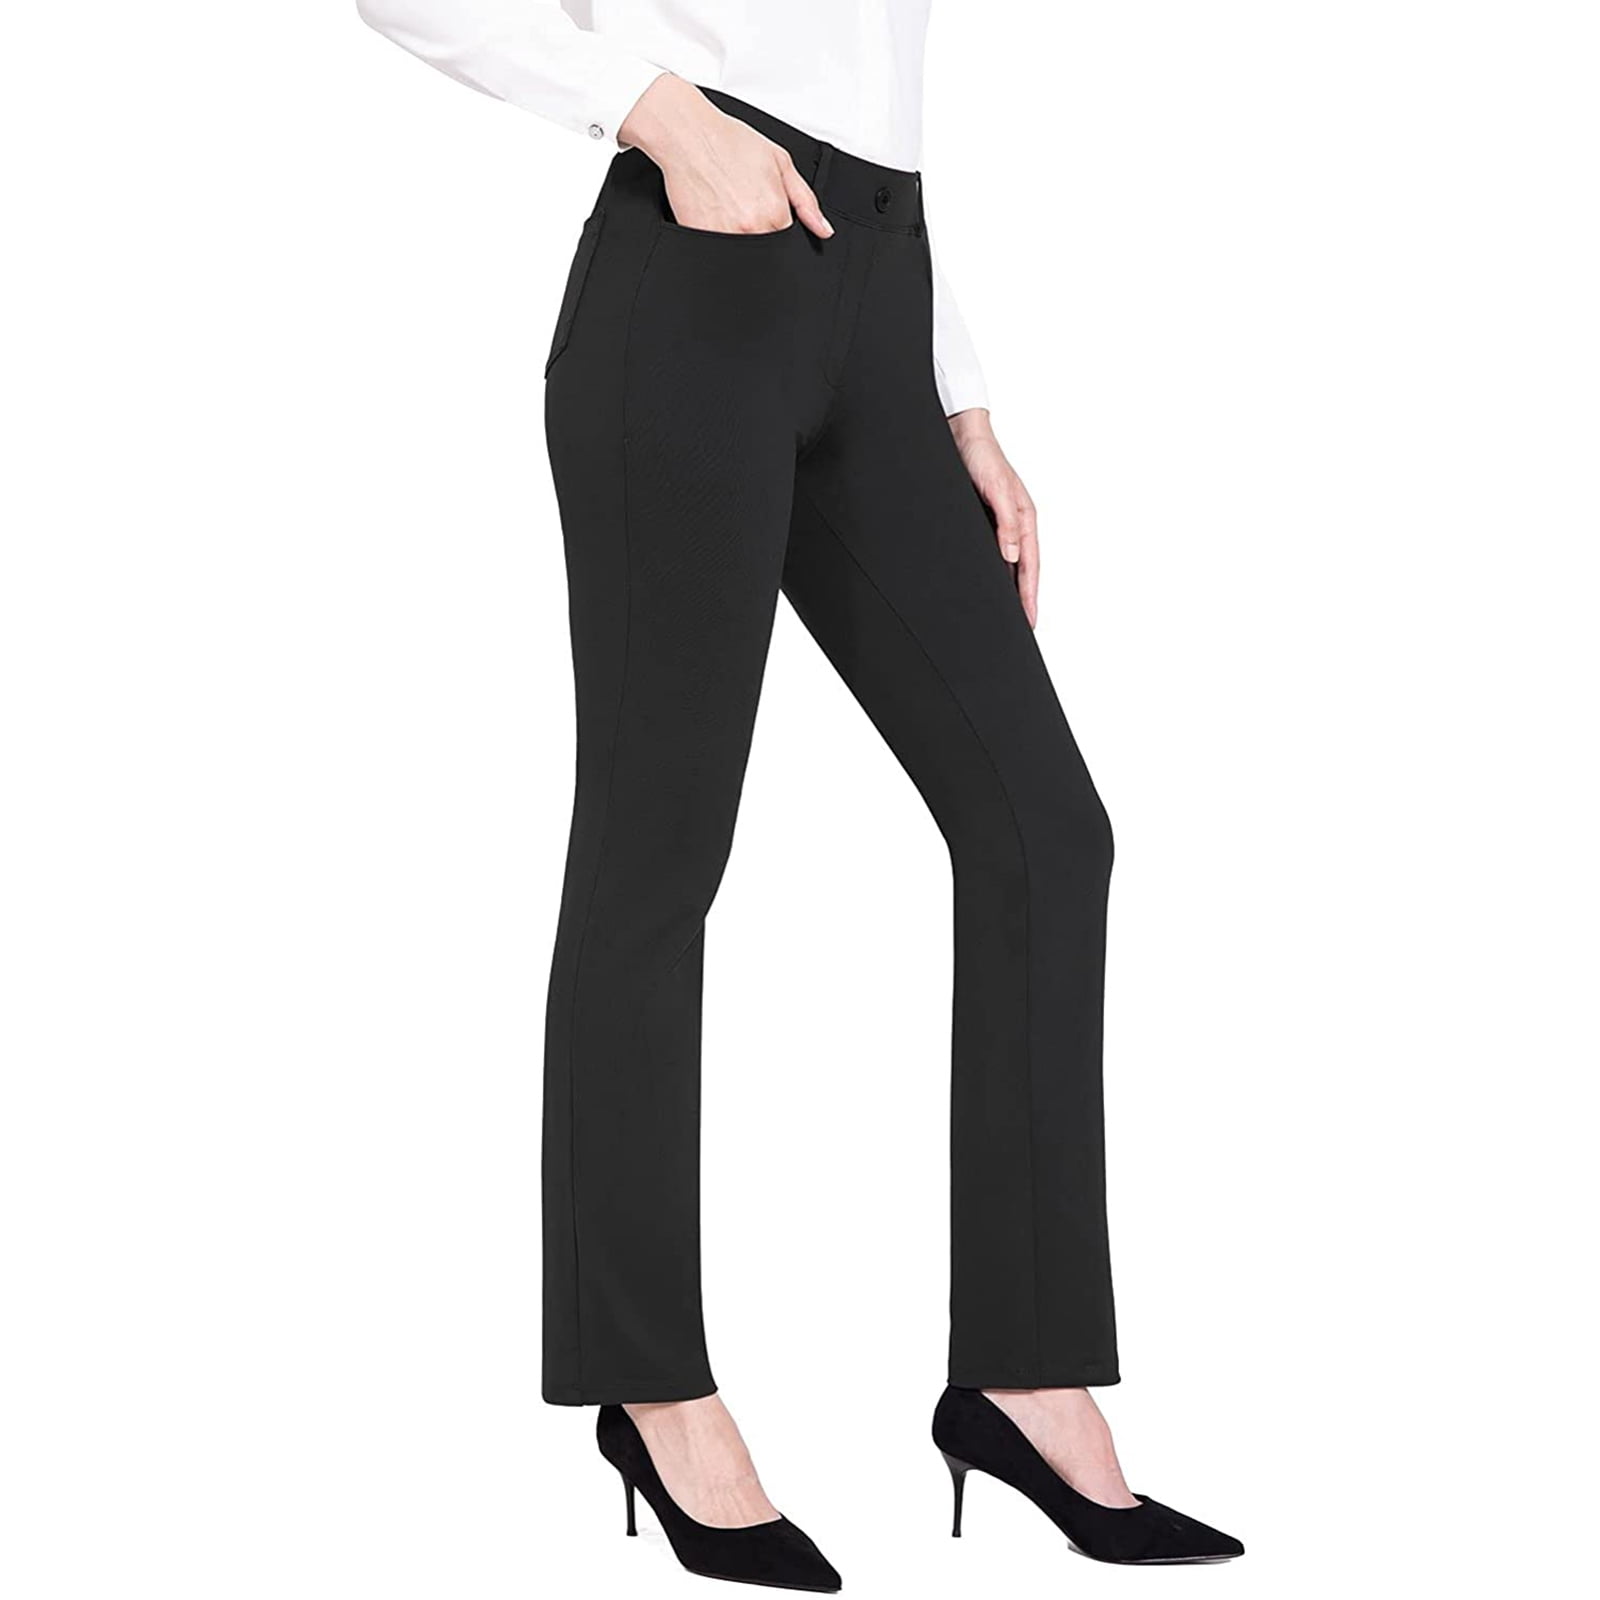 Women Stretchy Work Business Slacks Dress Pants Casual Straight Leg Trousers With Pockets 